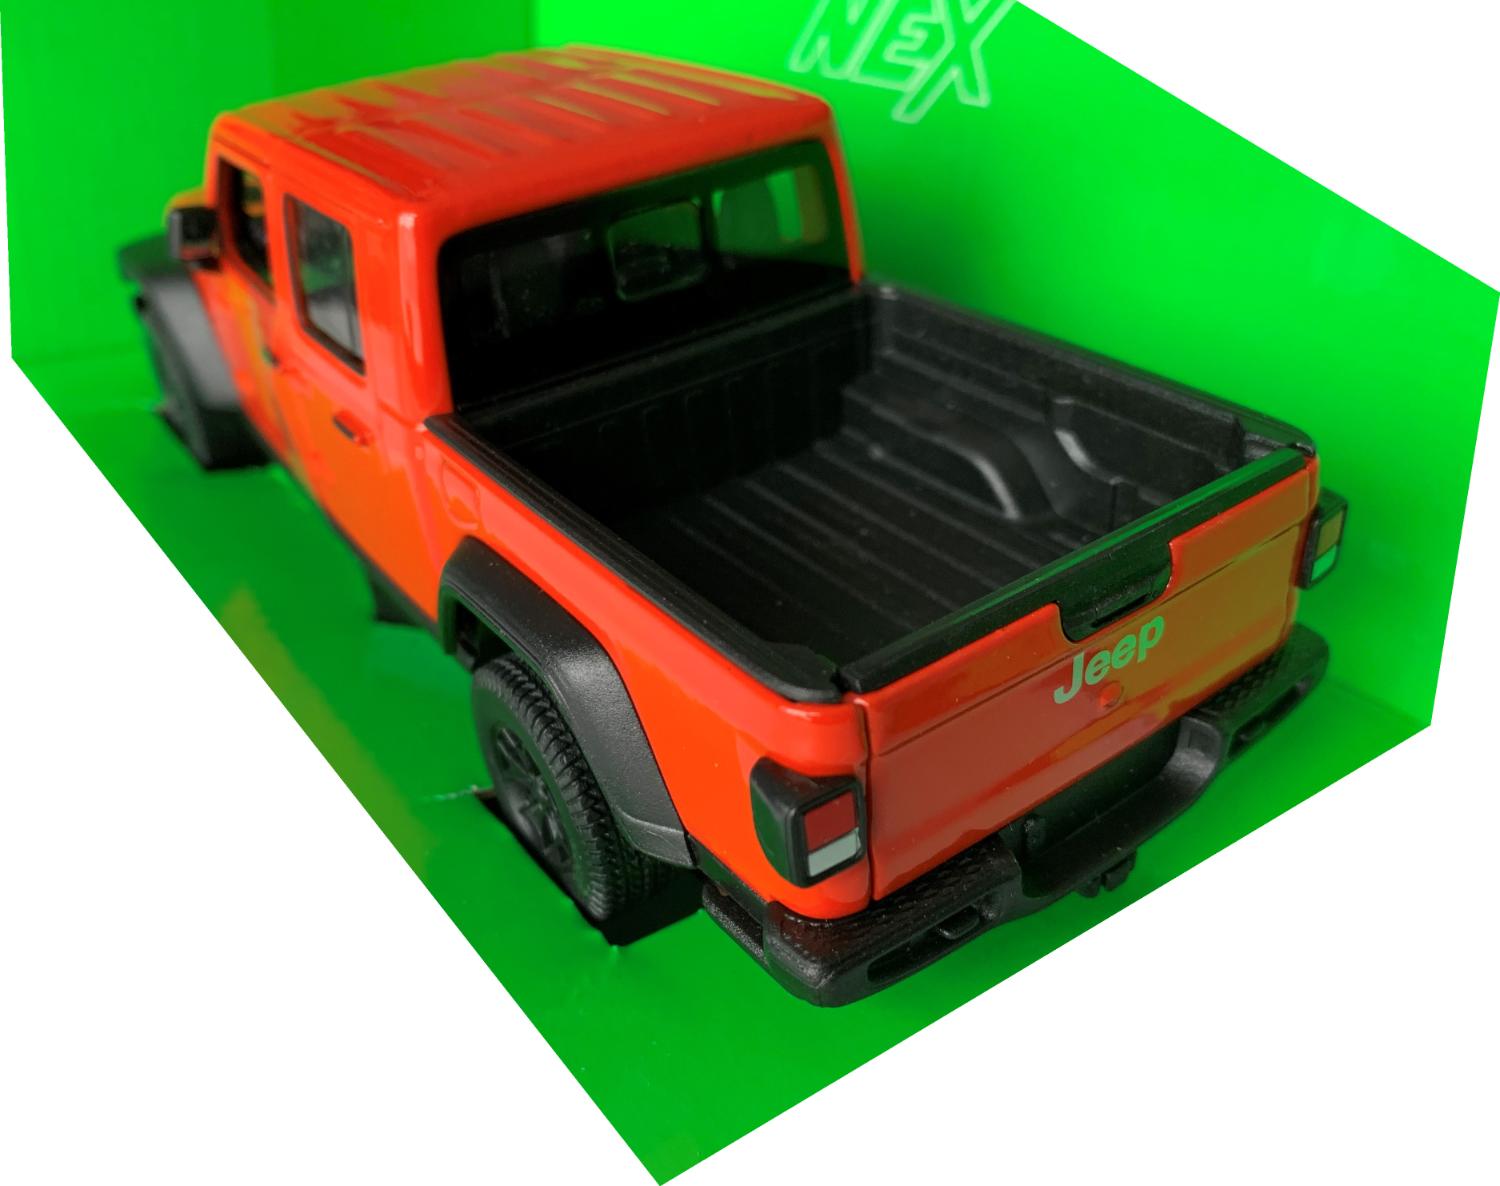 An excellent reproduction of the Jeep Gladiator Rubicon with high level of detail throughout, all authentically recreated